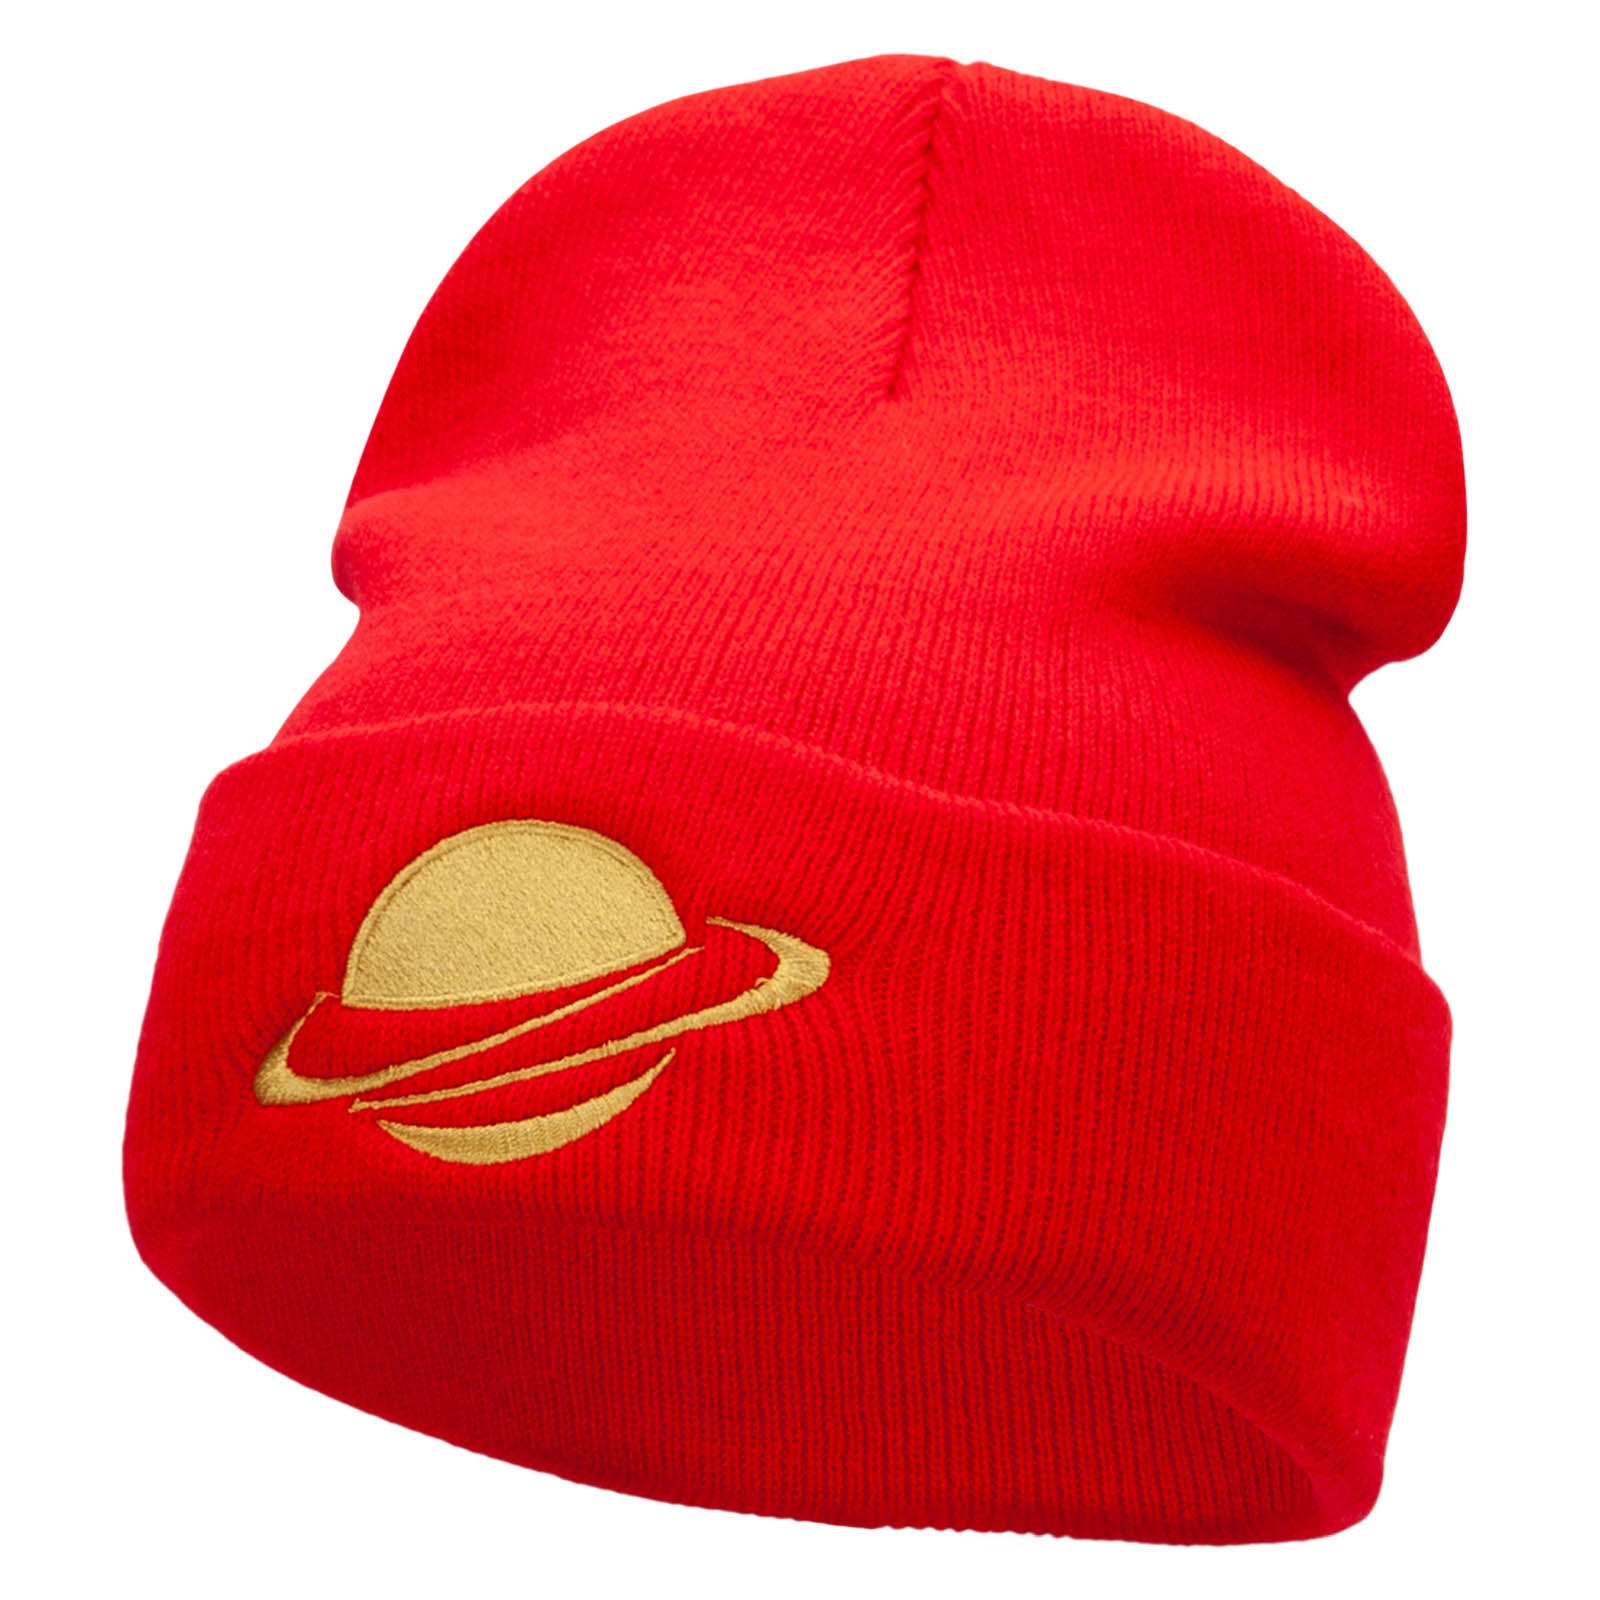 Planet Saturn Embroidered 12 Inch Long Knitted Beanie - Red OSFM